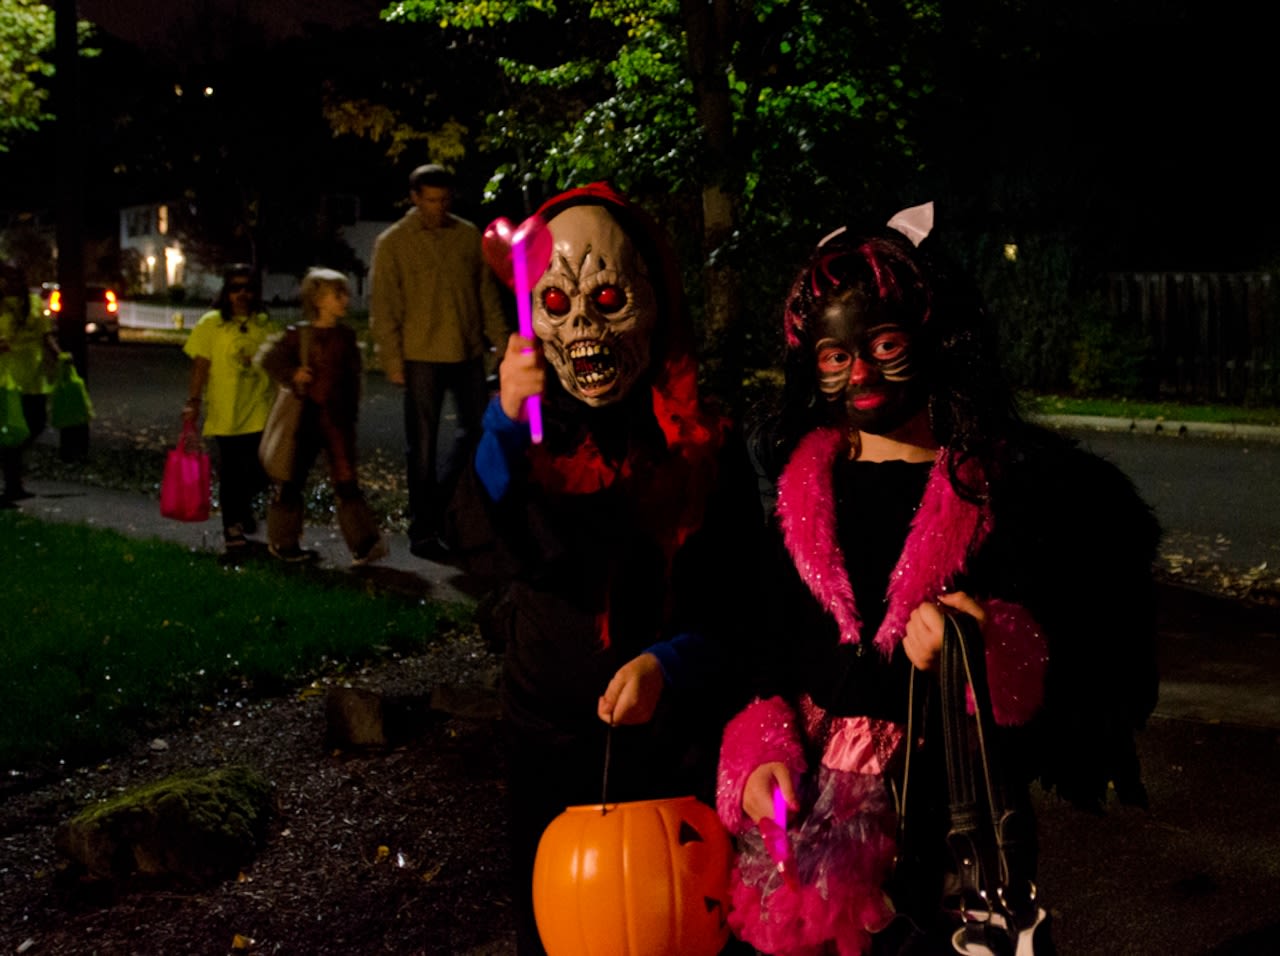 Are prank-prone trick-or-treaters next for AG Dave Yost?